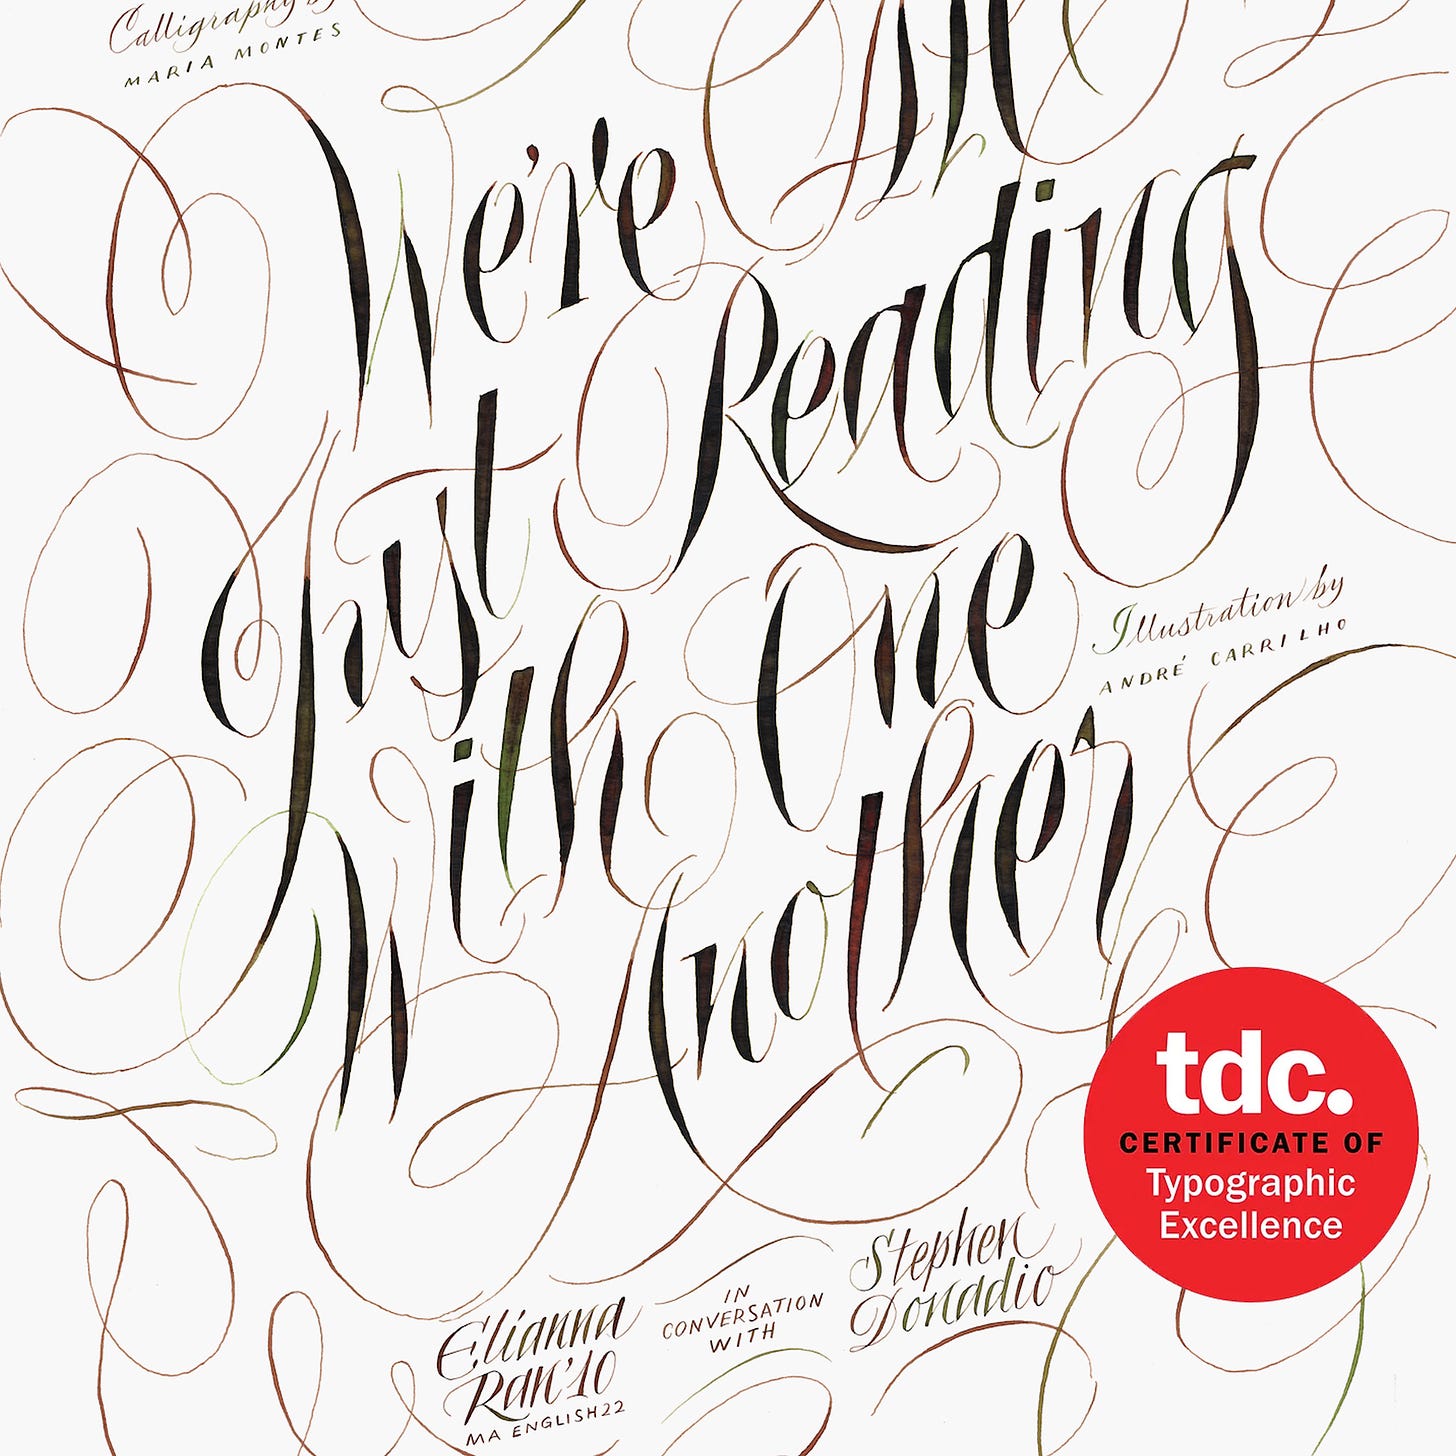 calligraphic editorial tdc certificate of typographic excellence for Maria Montes.